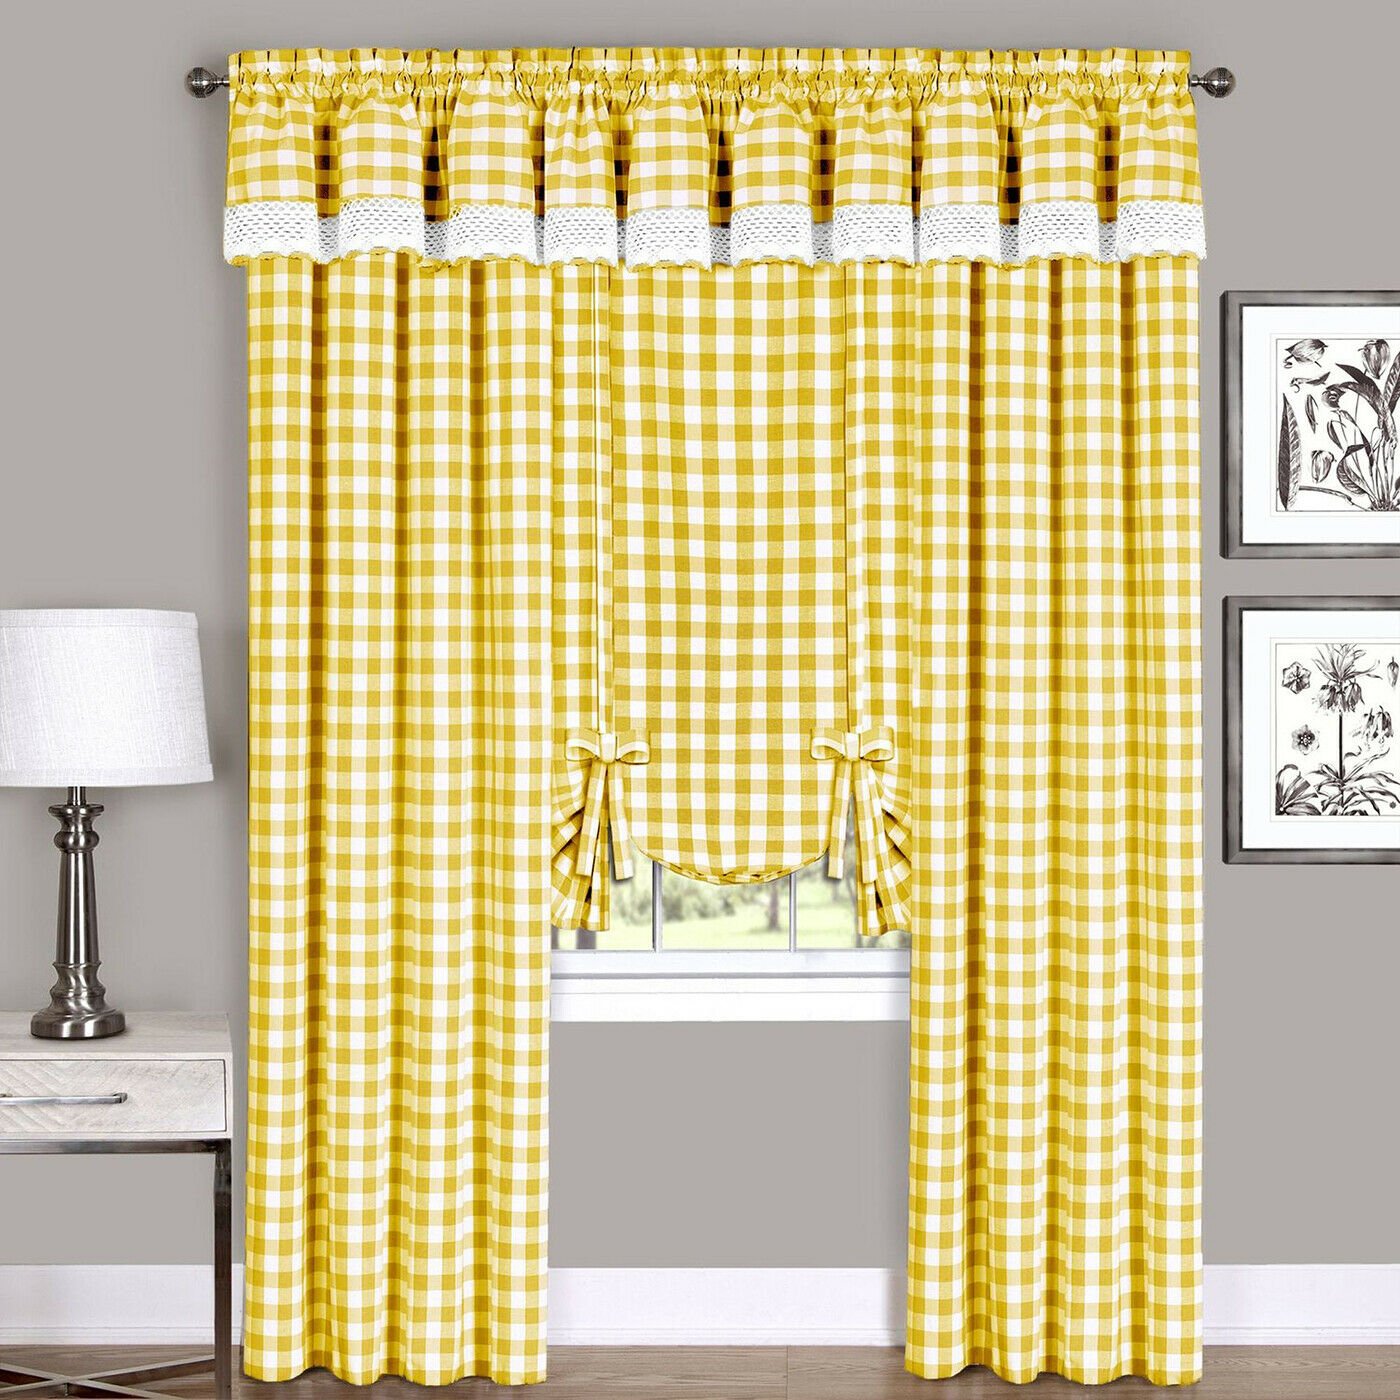 Soft Yellow Checkered Plaid Gingham Window Curtain Drapes Panel Valance Shade | Decor Gifts and More